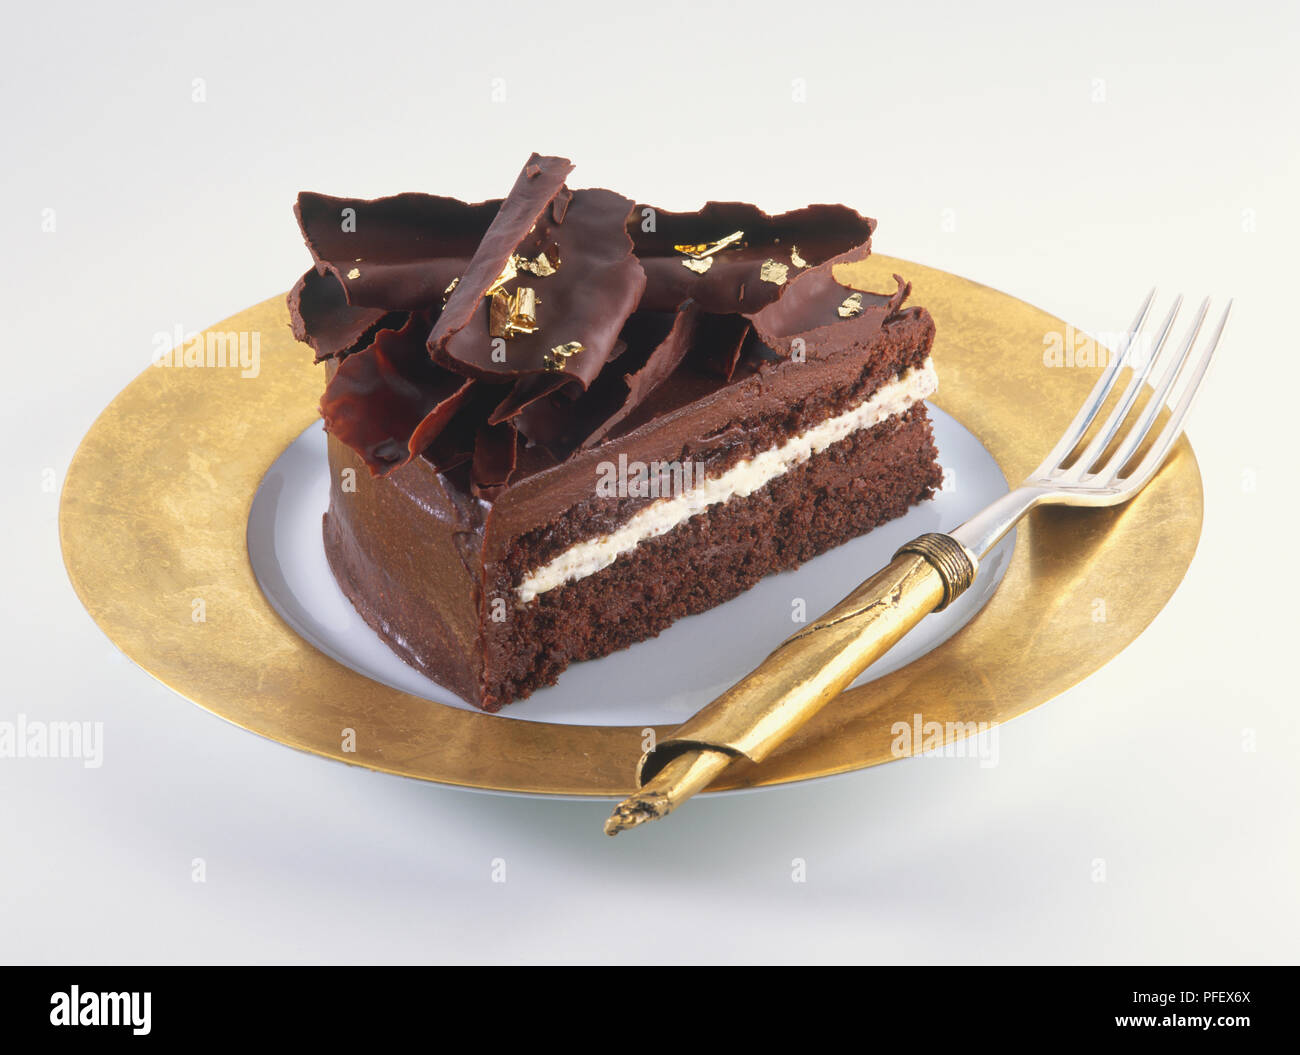 Slice of chocolate cake decorated with chocolate curls and pieces ...